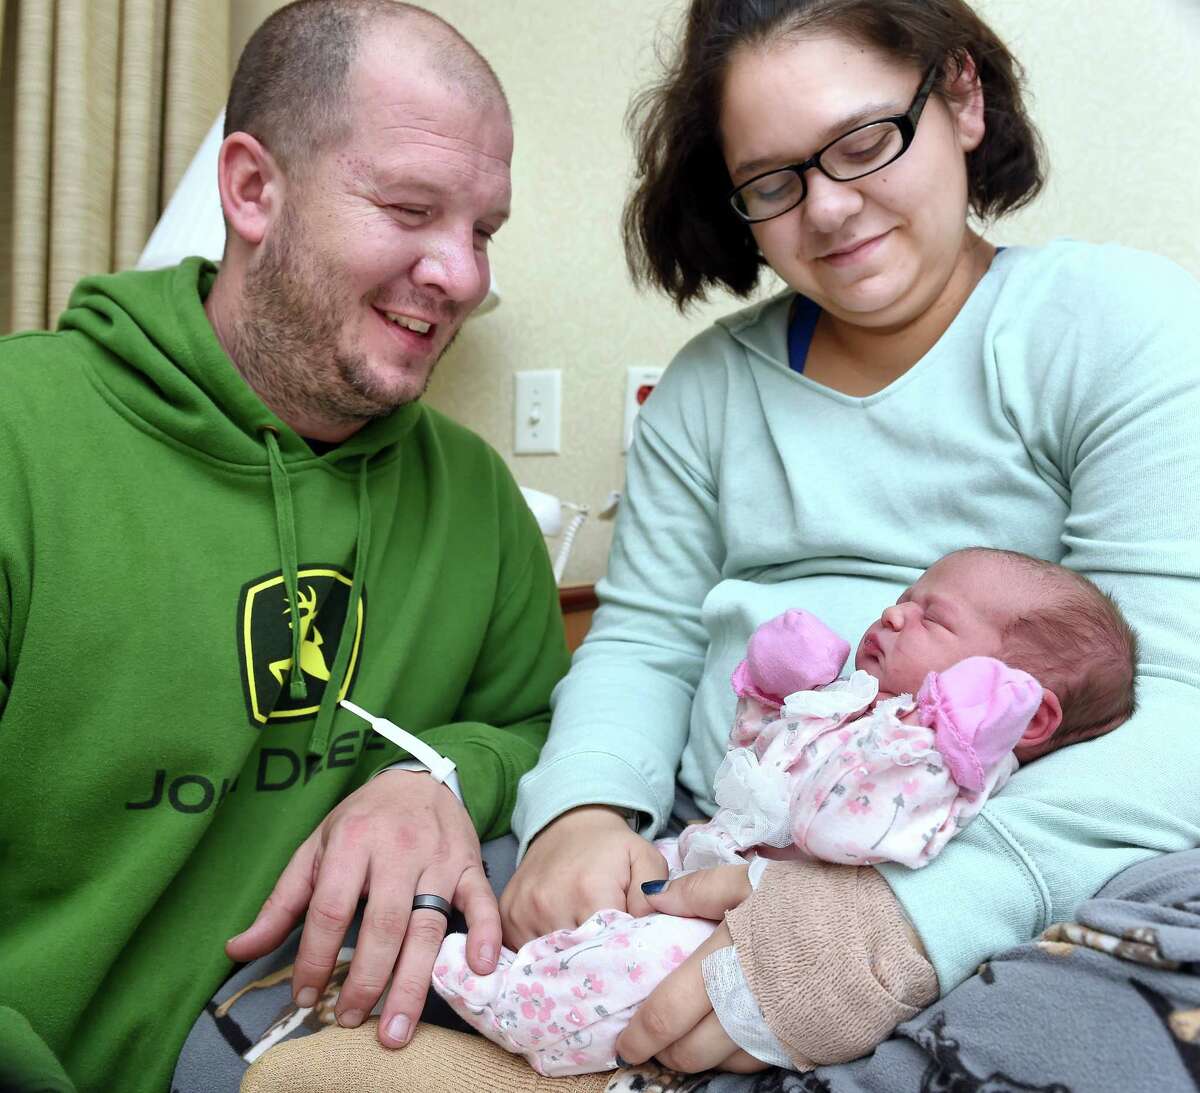 Dave and Taylor Venice of Woodbridge are photographed with their newborn daughter, Arabella, who was born at 12:04 a.m. on New Year's Day January 1, 2020 at the Childbirth Center at Griffin Hospital in Derby. Arabella weighs 8 lb. 6 oz. and is 20.5 inches.